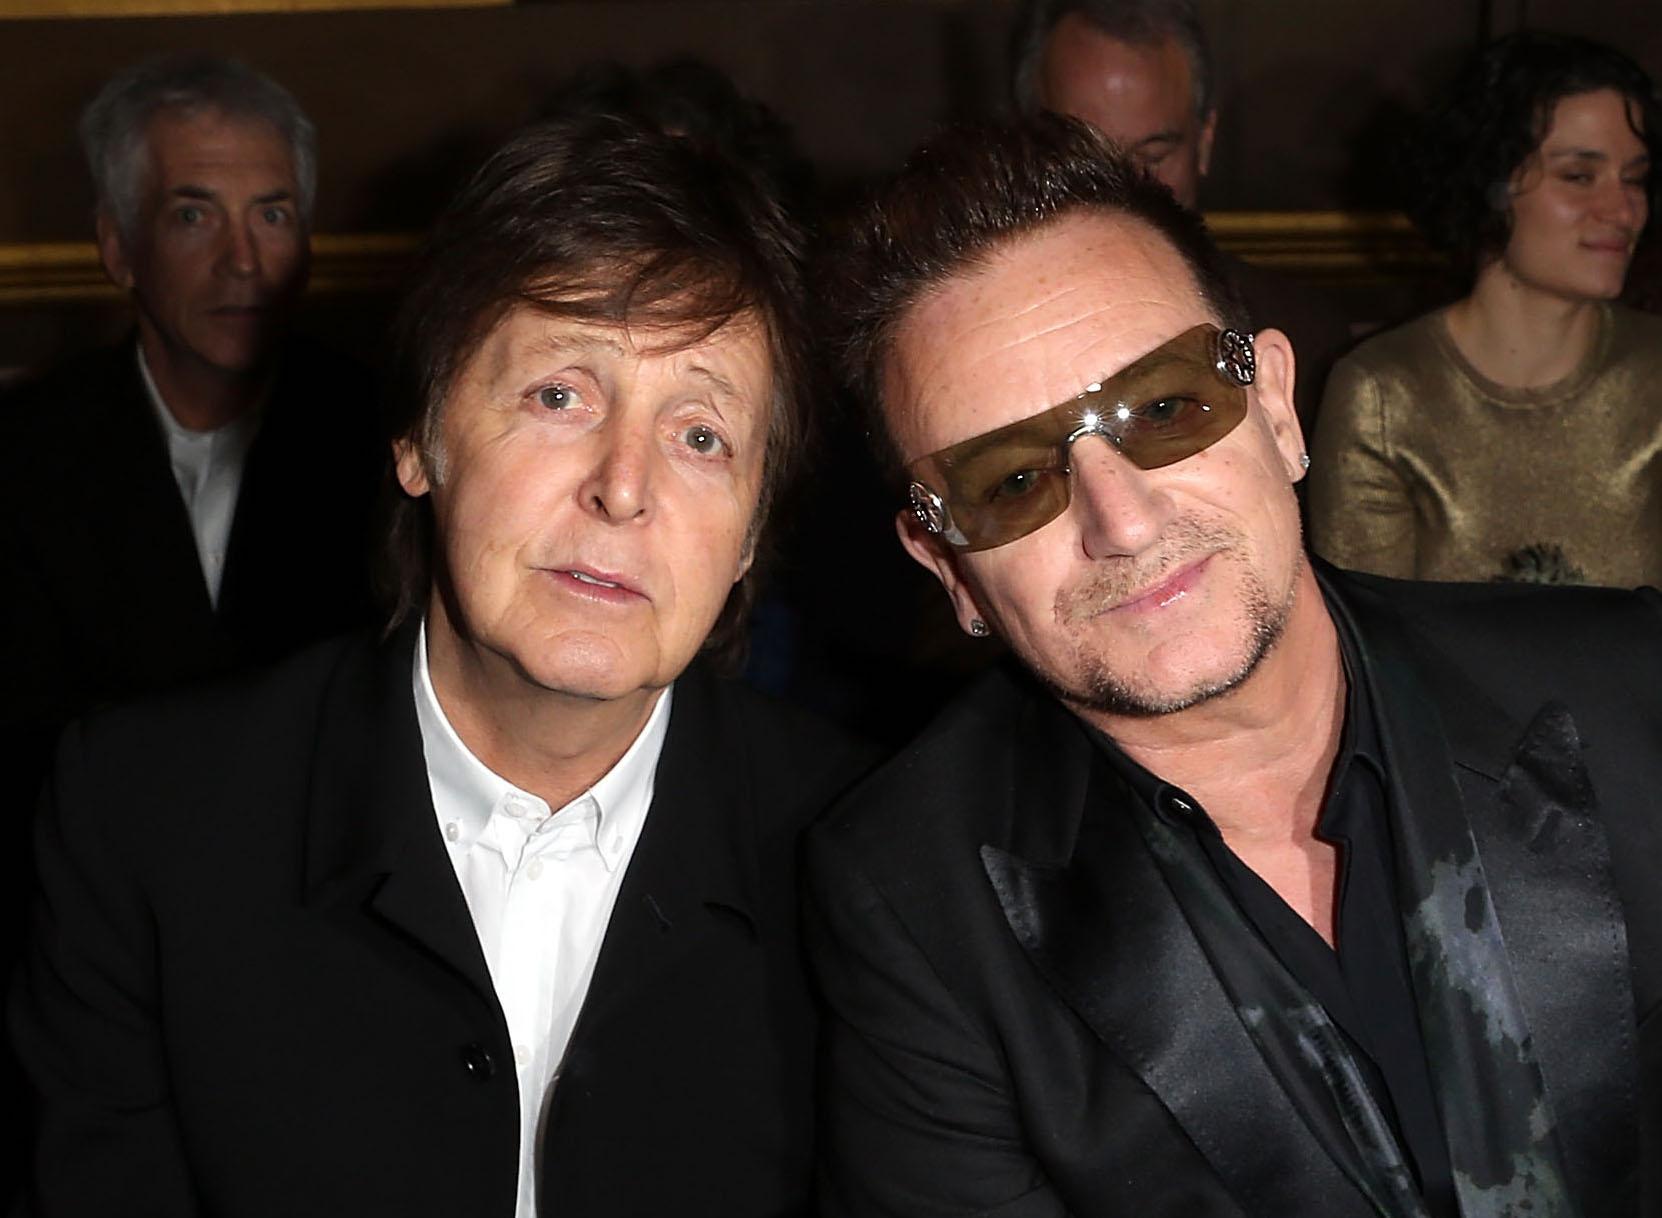 Sir Paul McCartney and Bono attend the Stella McCartney Fall/Winter 2013 Ready-to-Wear show as part of Paris Fashion Week on March 4, 2013 in Paris, France.